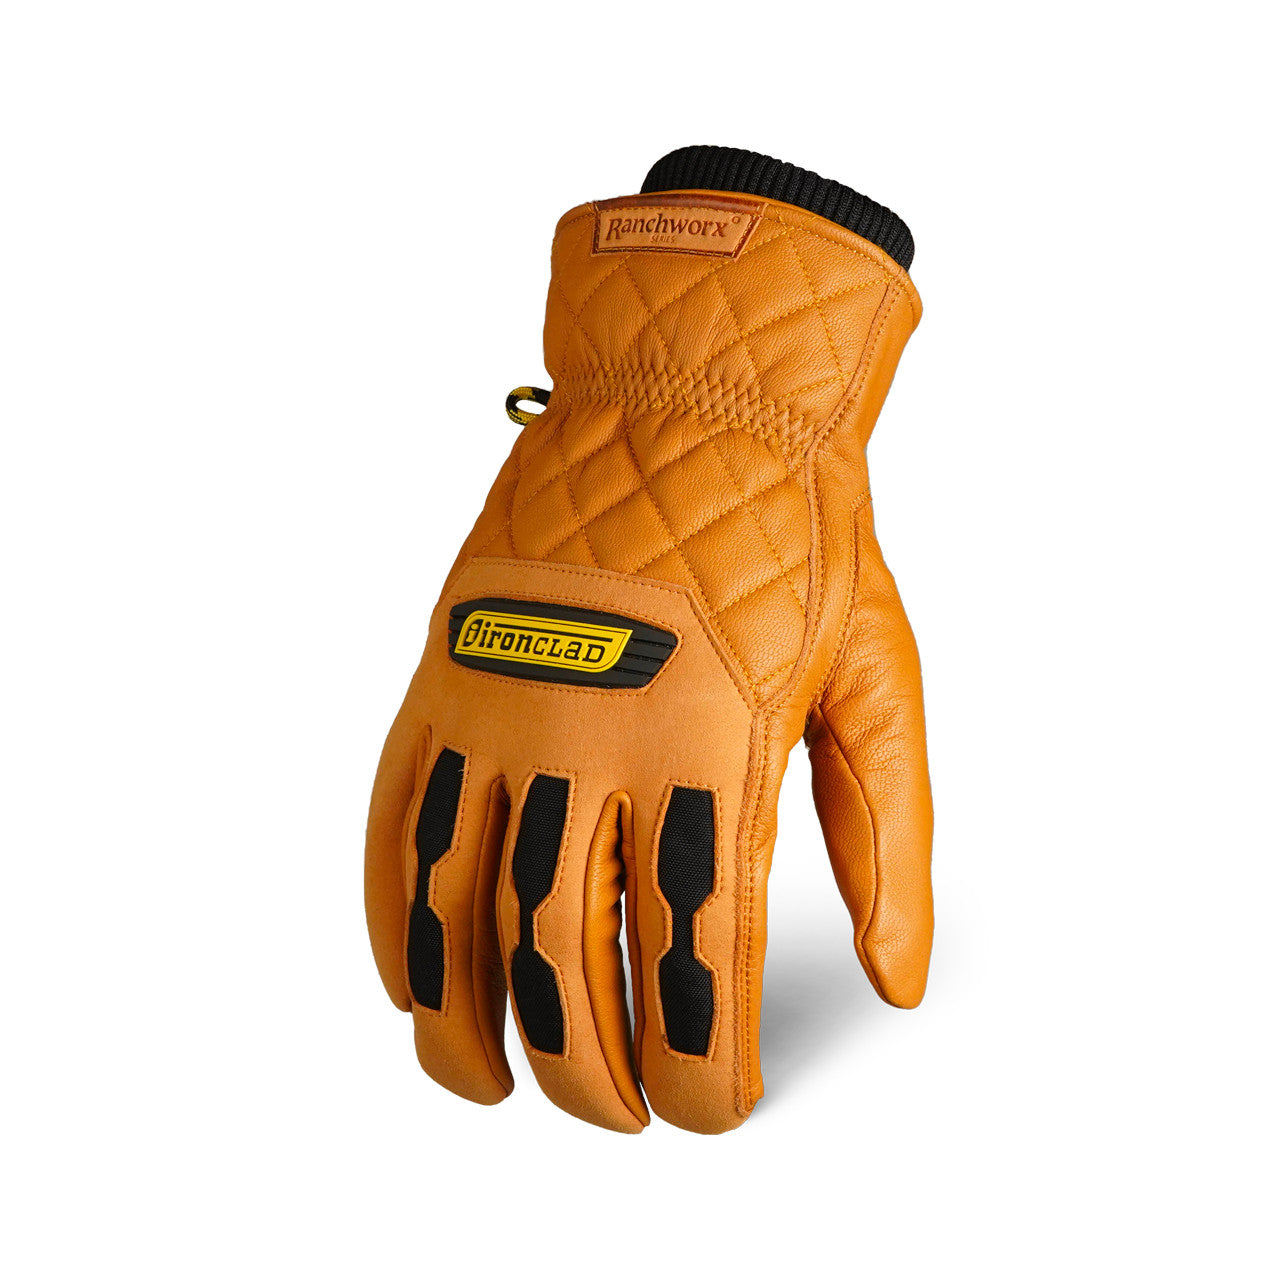 Ironclad RANCHWORX® Insulated Glove Tan-eSafety Supplies, Inc